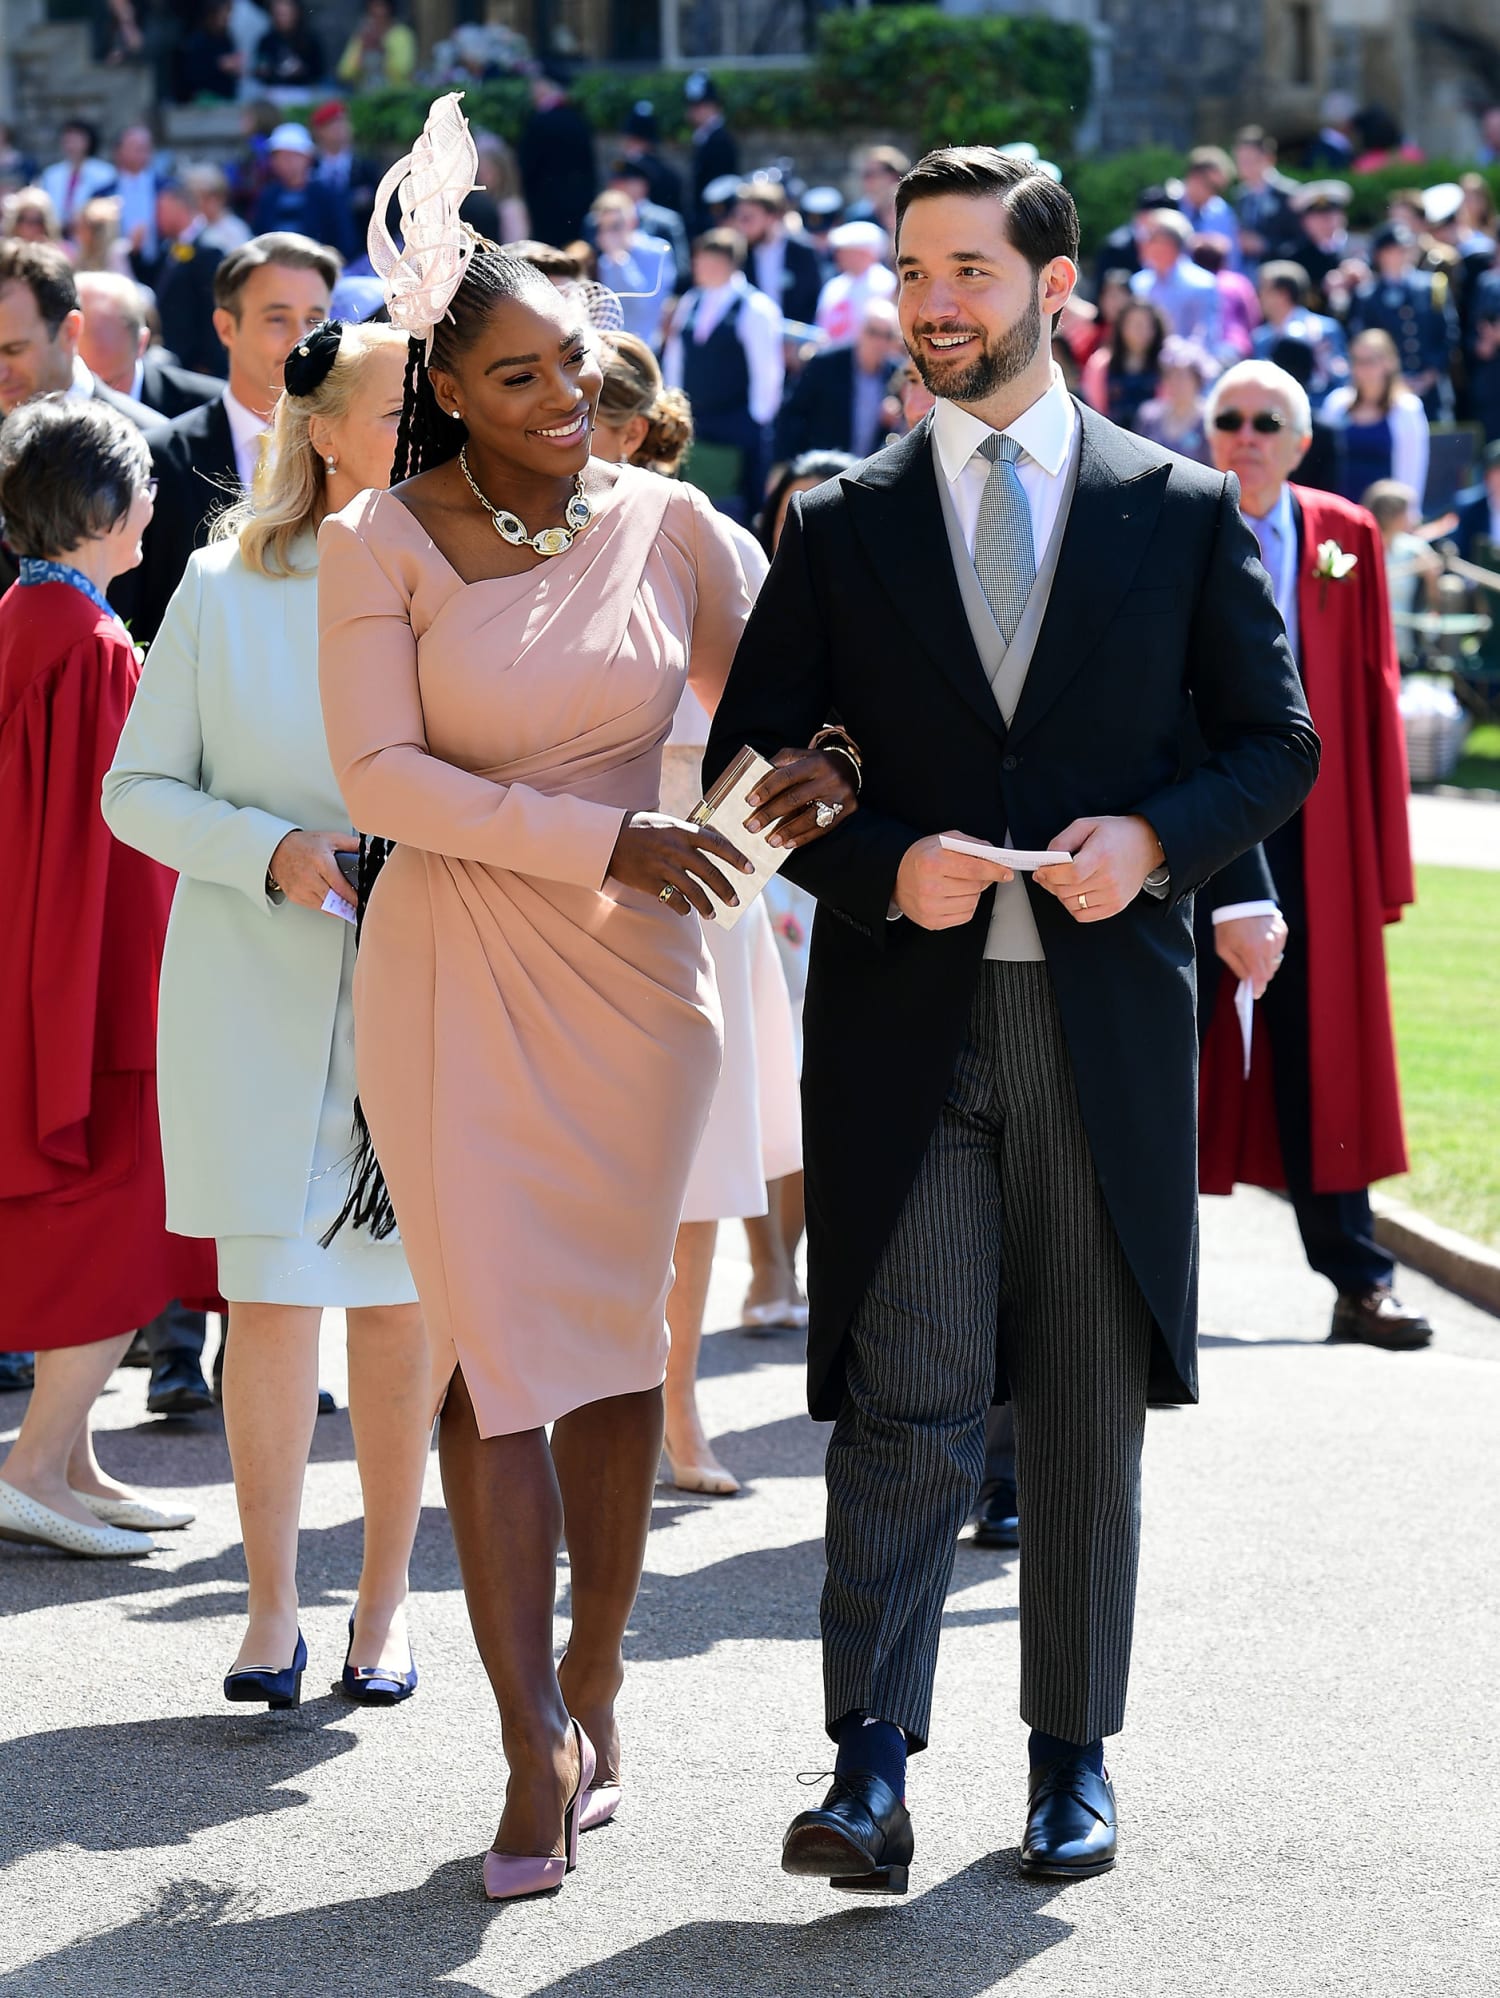 Dwelling talent St Serena Williams wore sneakers to a royal wedding event